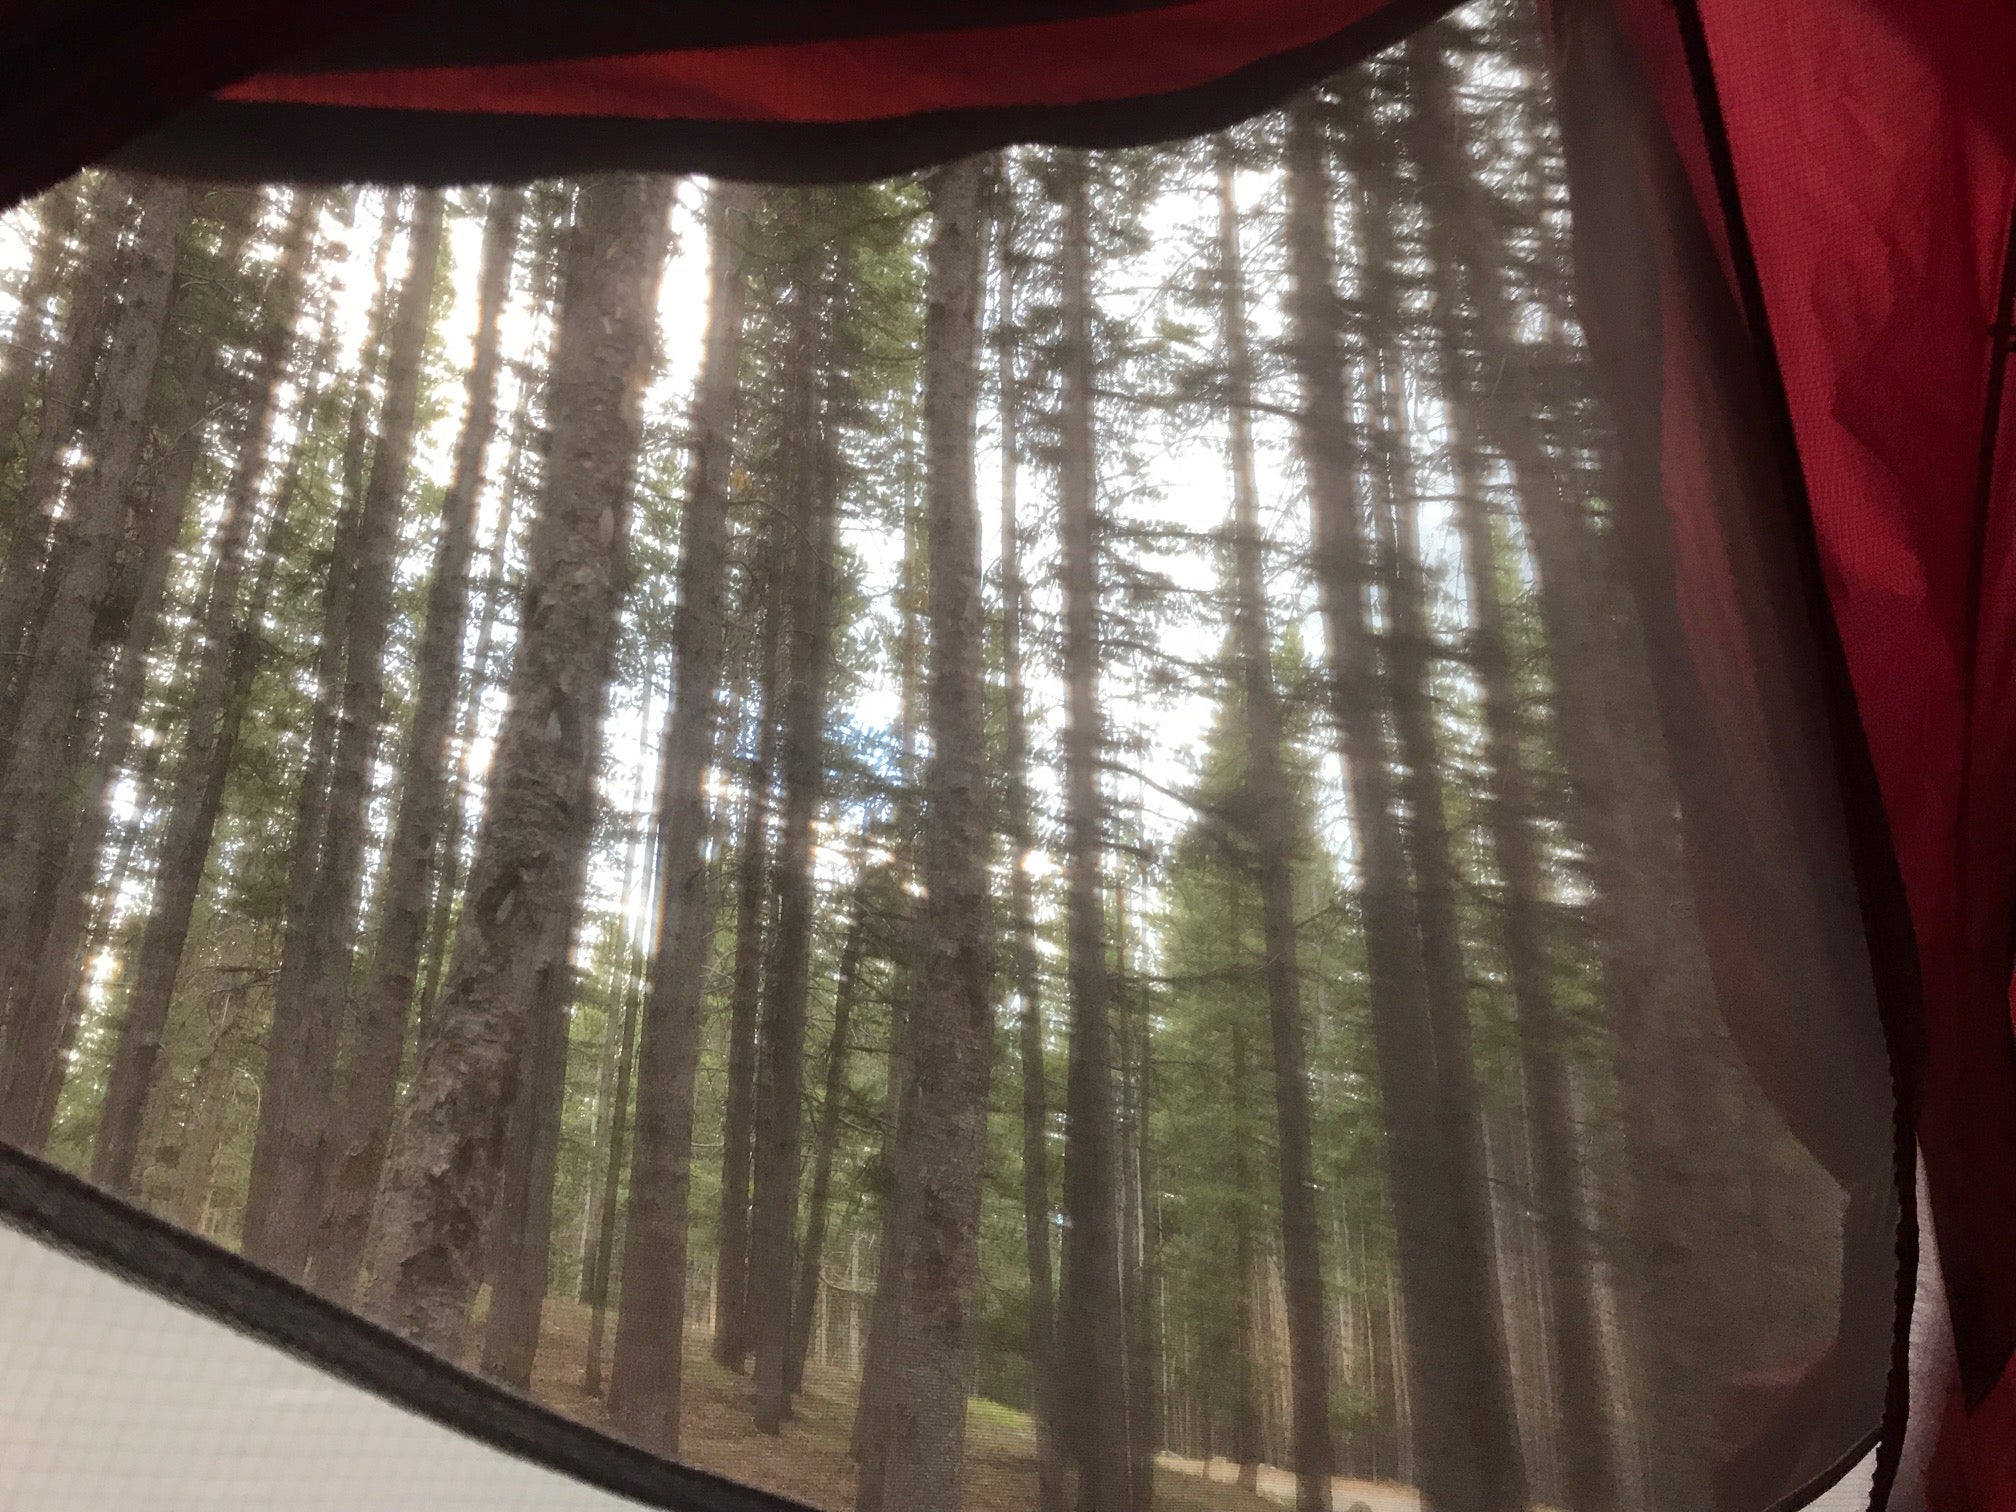 View from my tent. Lots of mosquitoes here in summer, so be prepared!